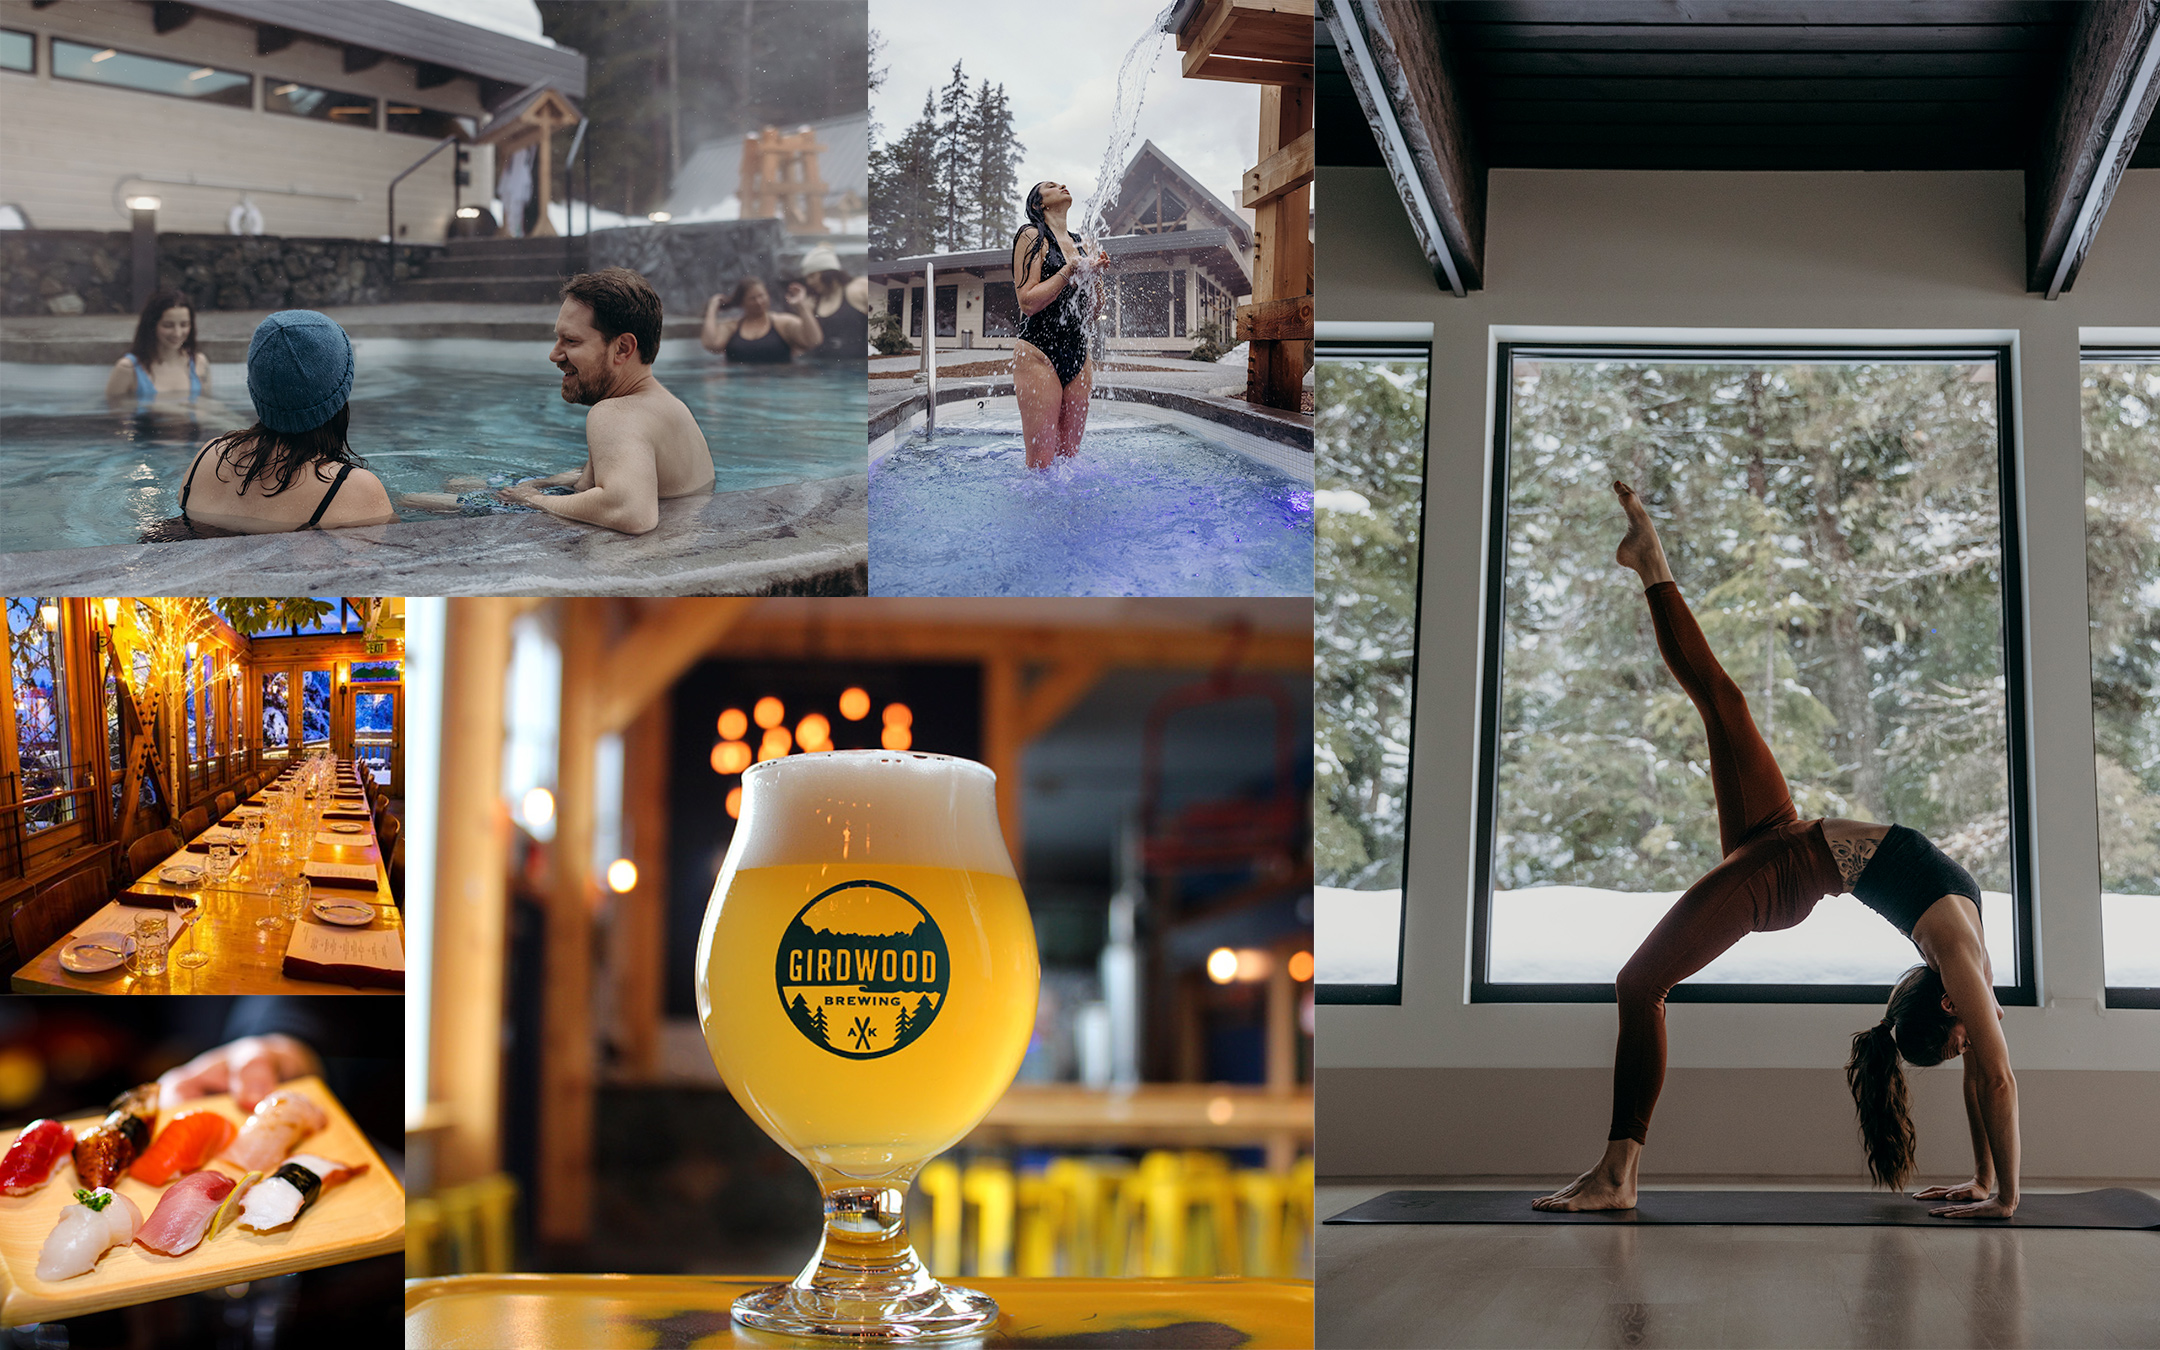 Girdwoods many down day activities such as yoga, the brewery and the Nordic Spa.